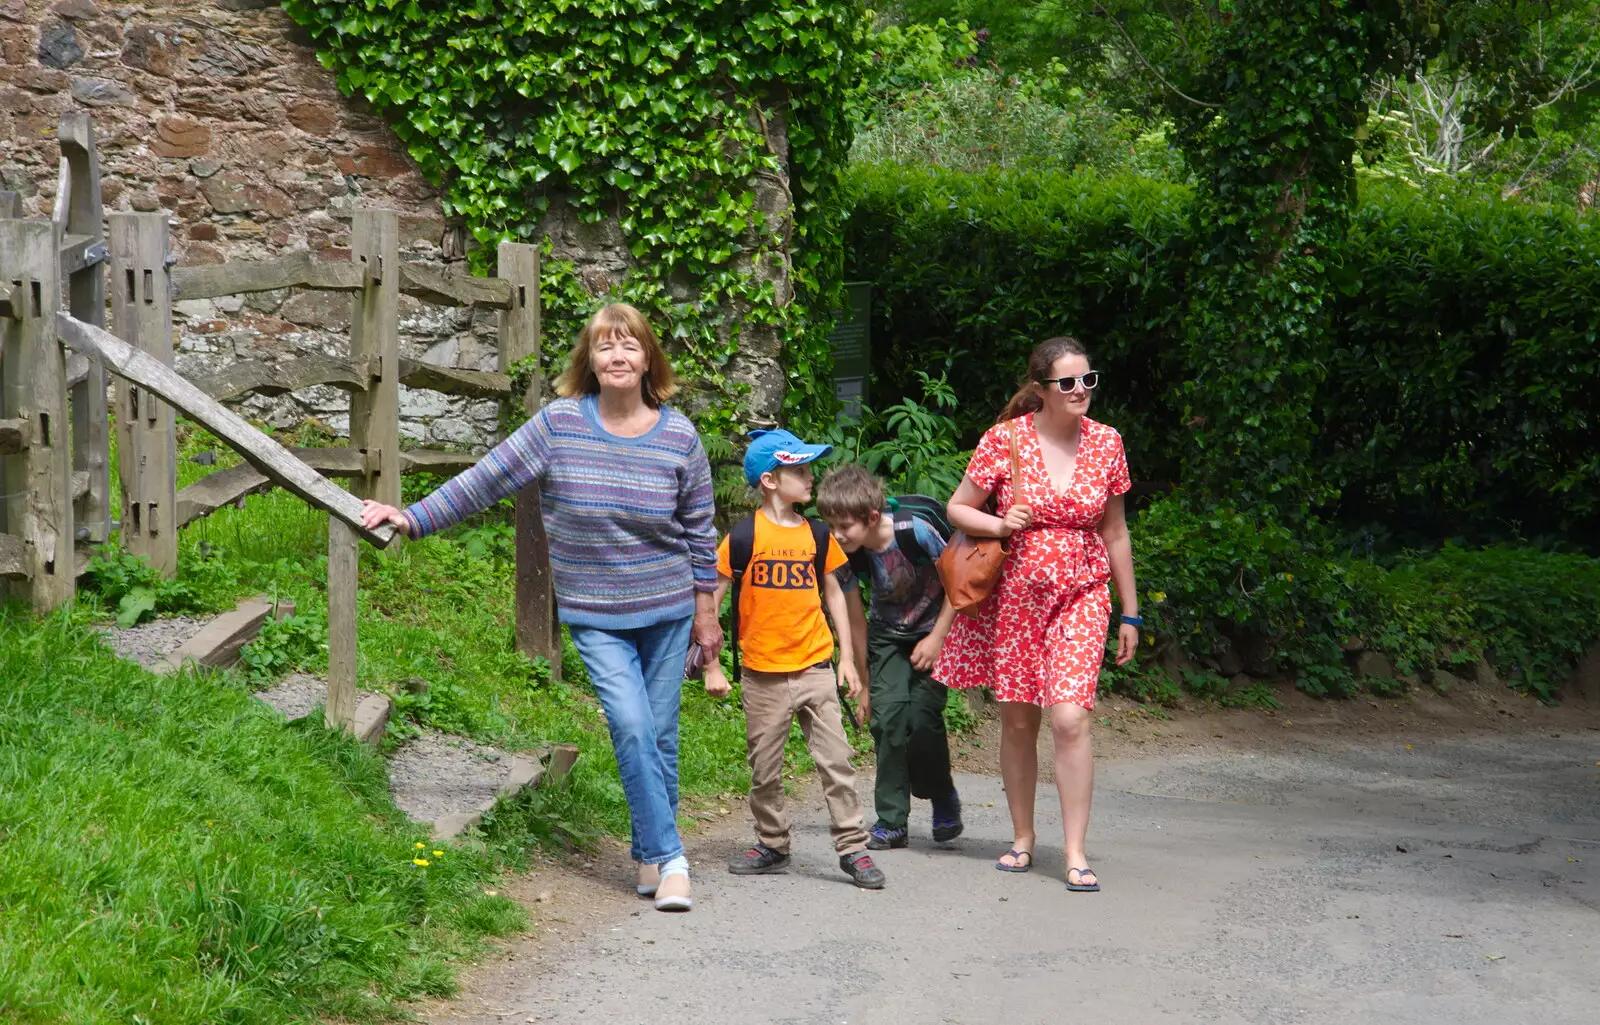 Stomping up the steep hill back to the car park, from Chagford Lido and a Trip to Parke, Bovey Tracey, Devon - 25th May 2019